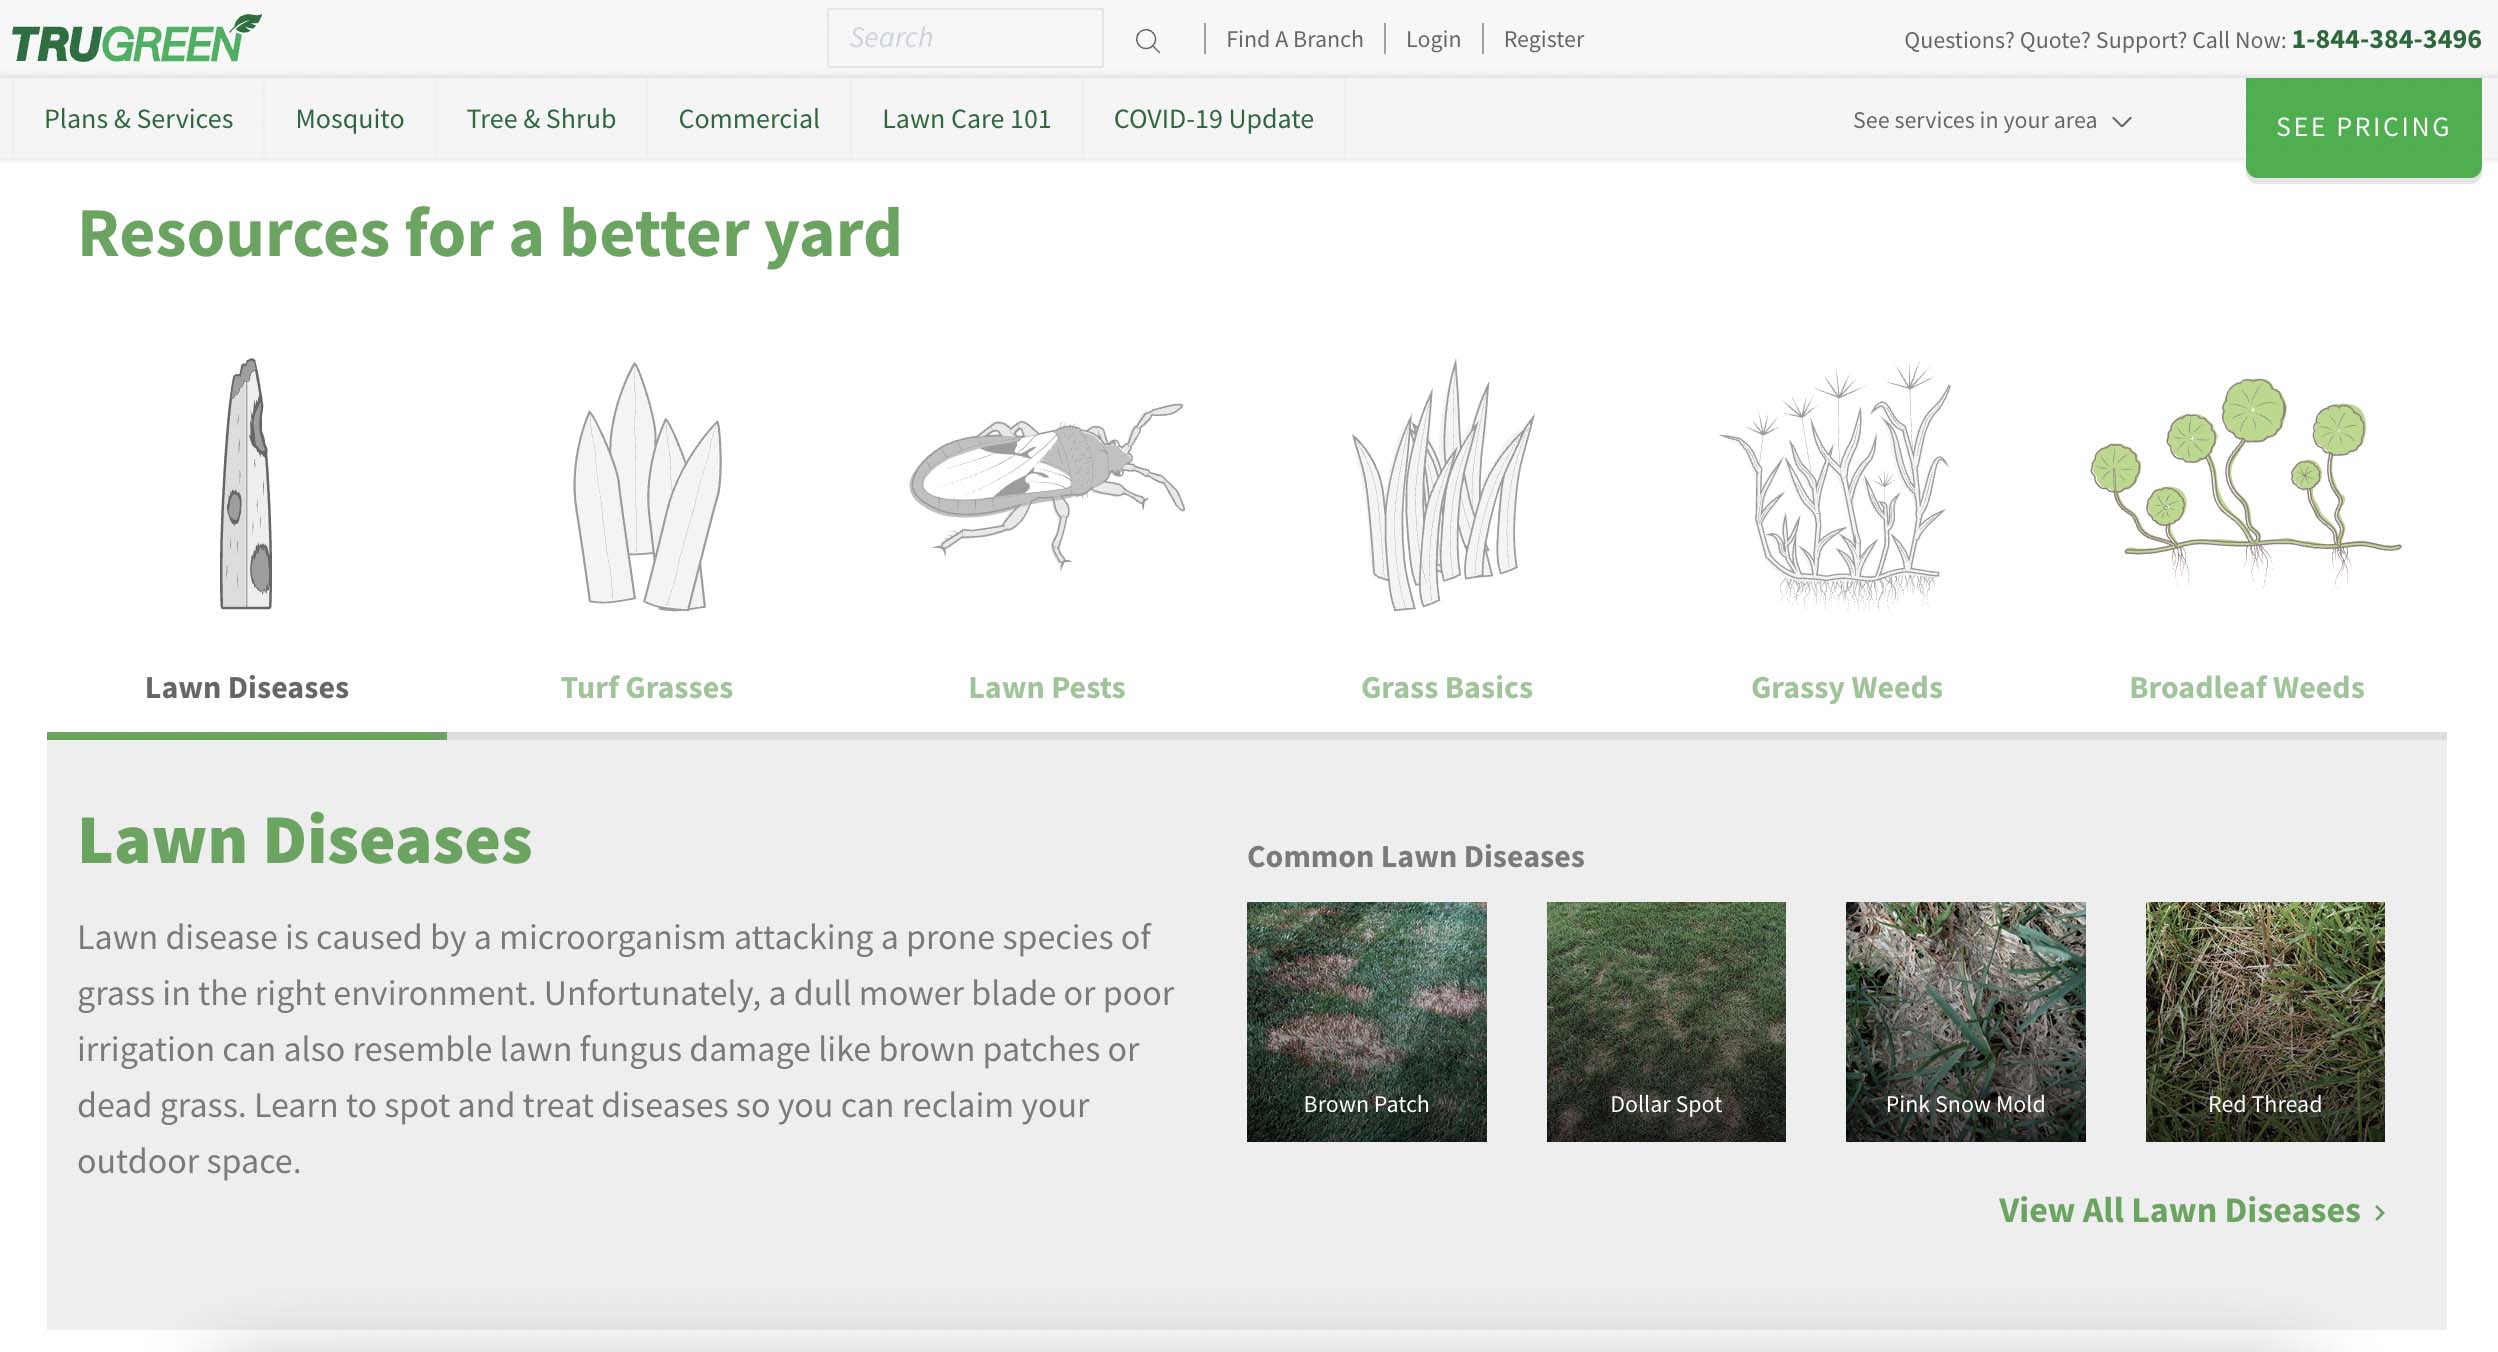 A screenshot of the lawn maintenance resources available on TruGreen's website.